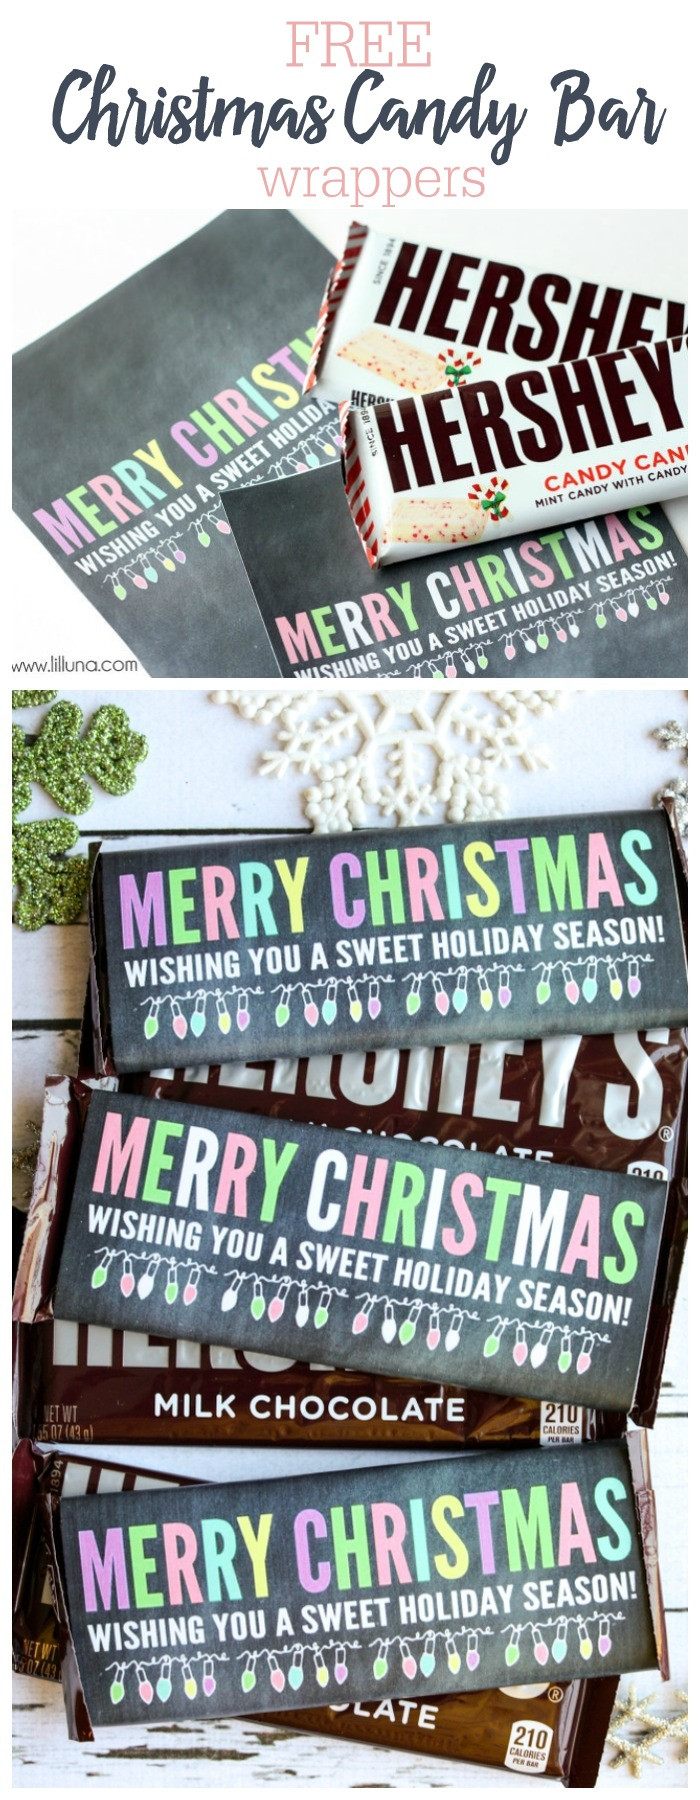 Christmas Candy Bar Wrappers
 Merry Christmas Candy Bar Wrappers